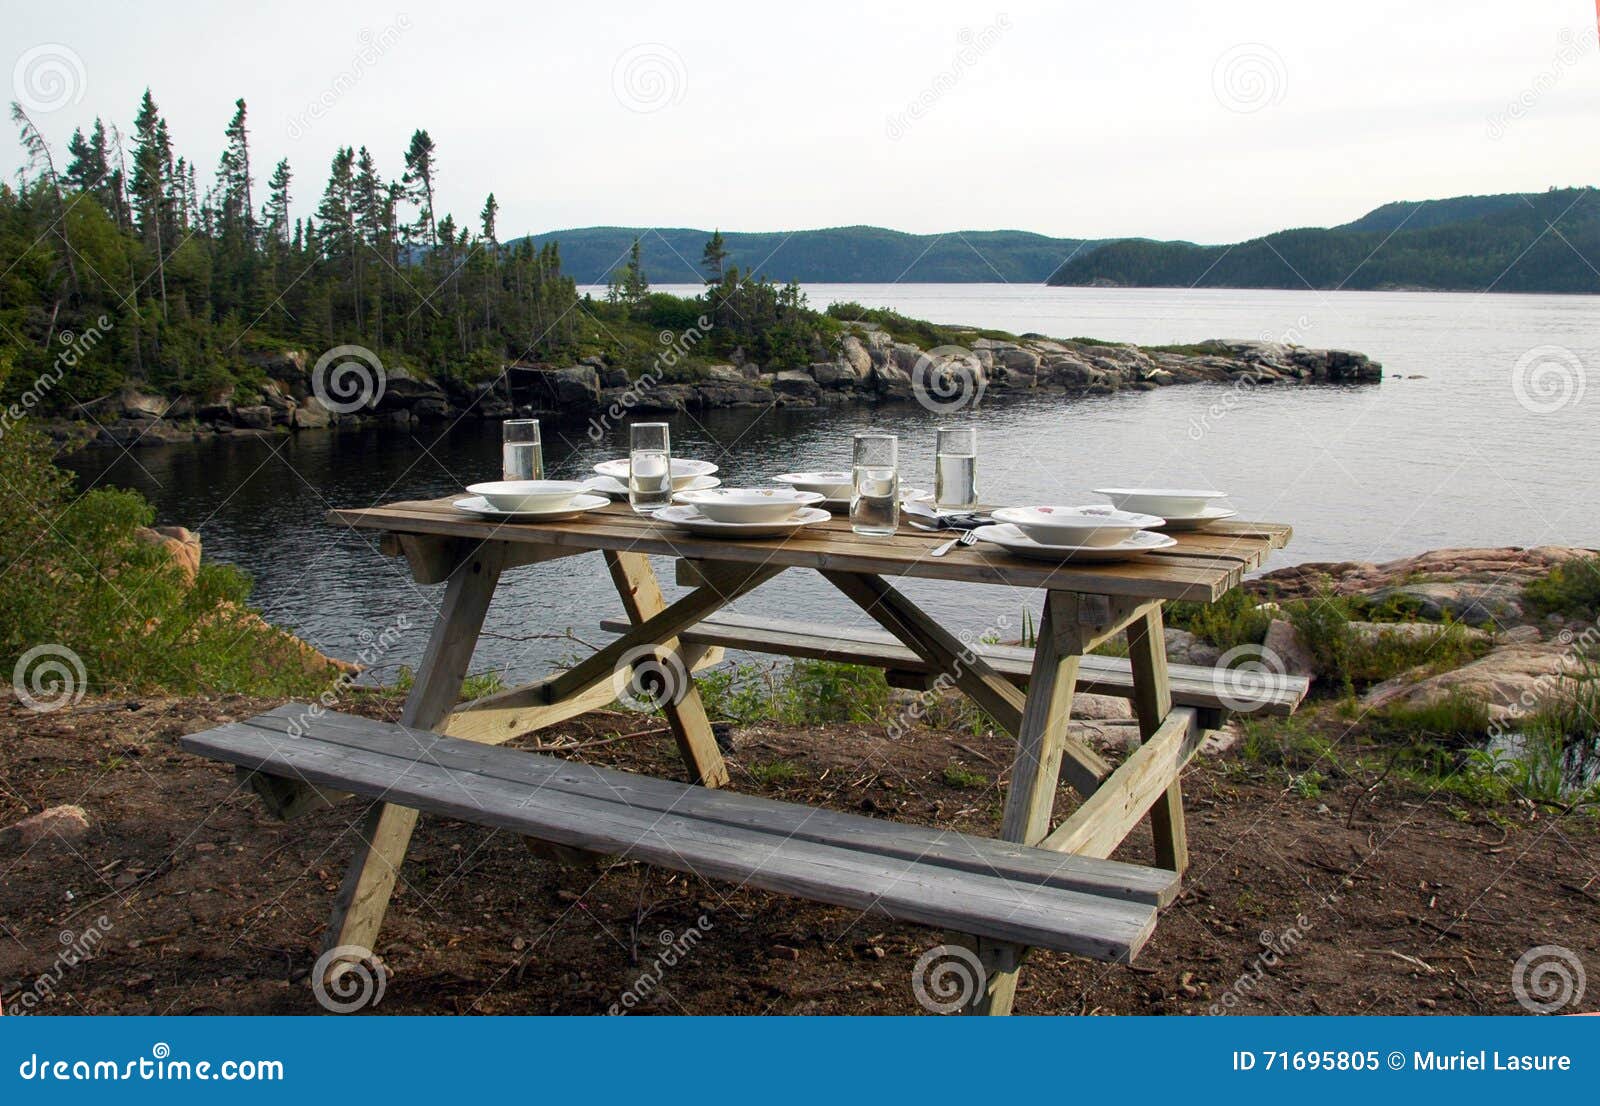 Dinner with a view stock image. Image of setting, dusk - 71695805